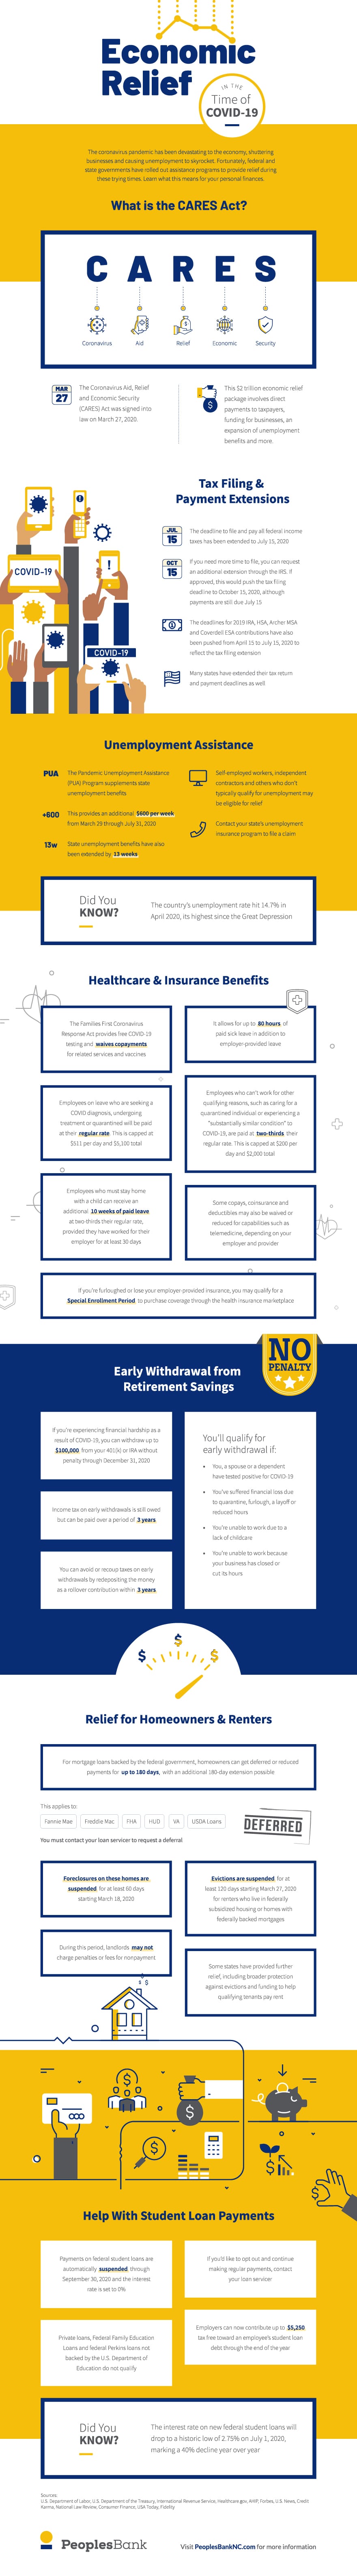 Infographic explaining the CARES Act